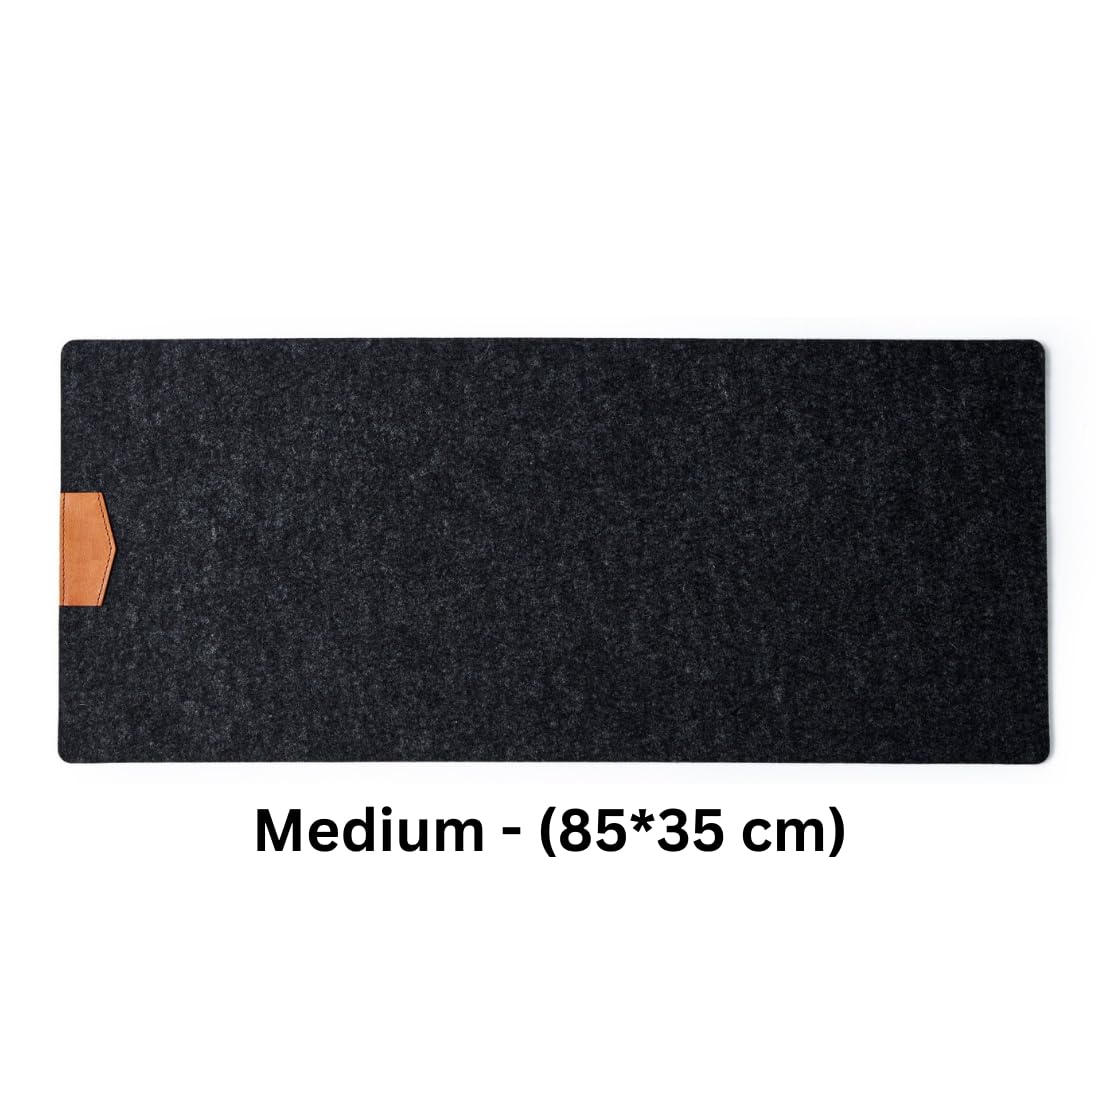 TIERNO Mouse pad and Desk pad - Natural Felt Mouse Pad - Keyboard Pad - Non Slip Desk Mat for Computer, Laptops and Gaming Console